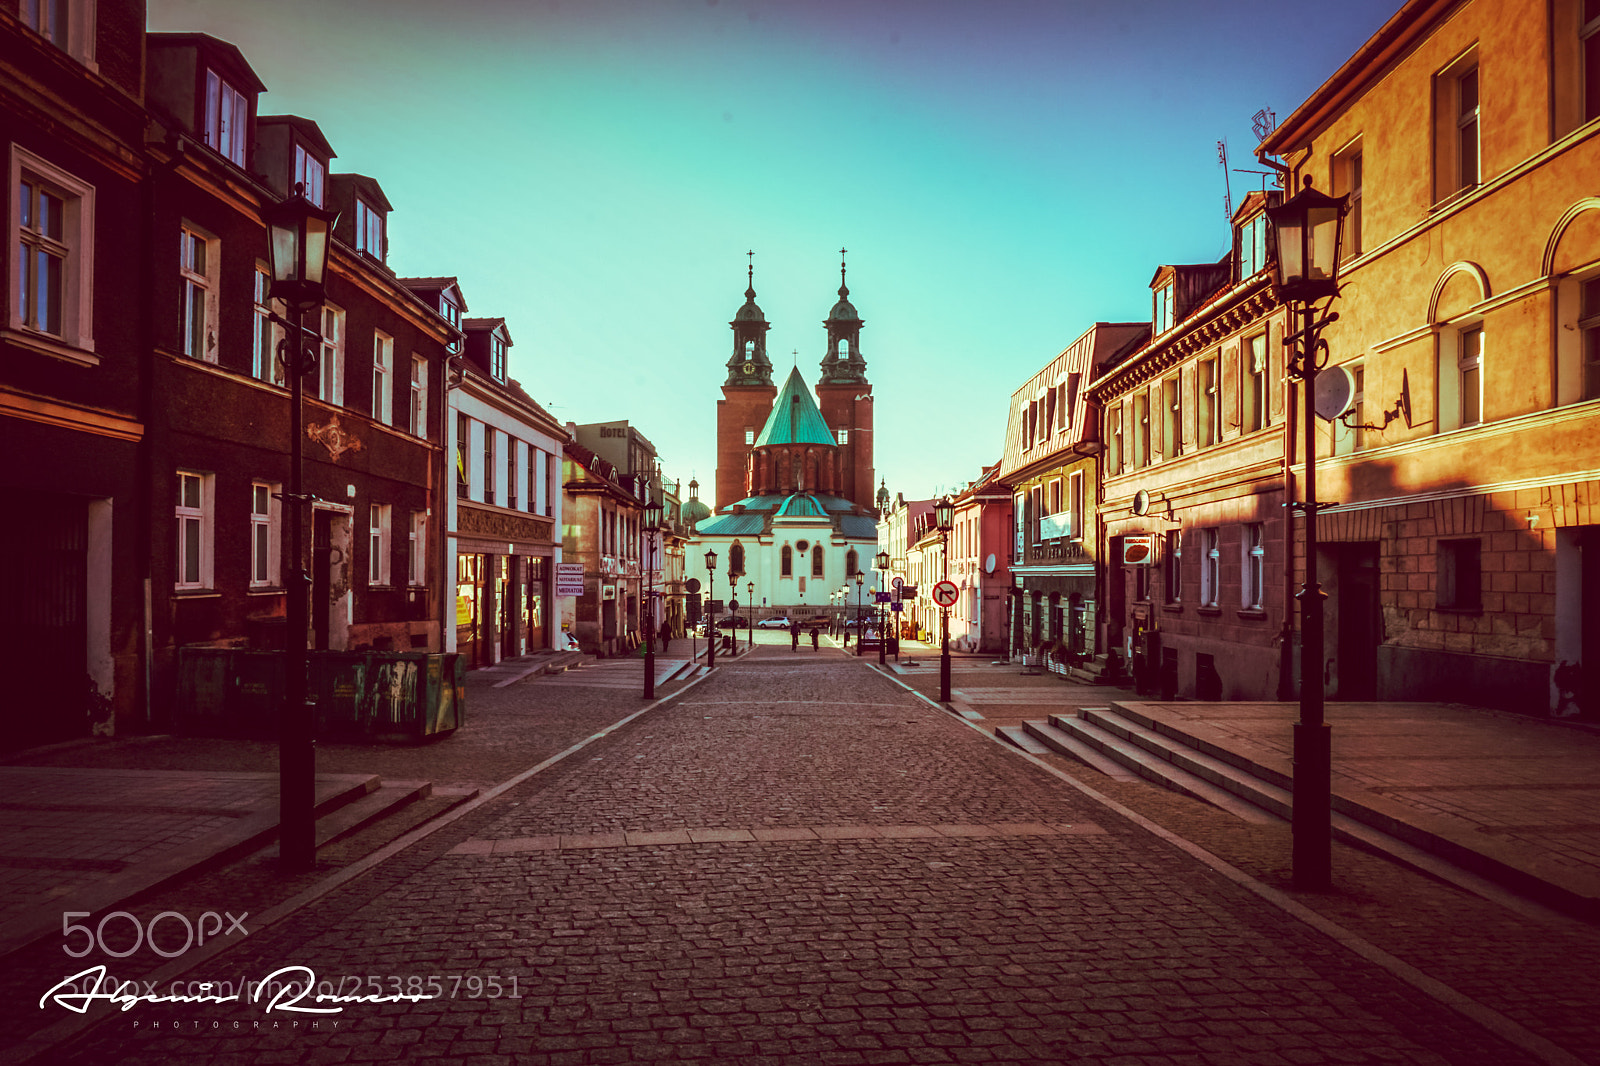 Sony a6000 sample photo. Streets of gniezno photography